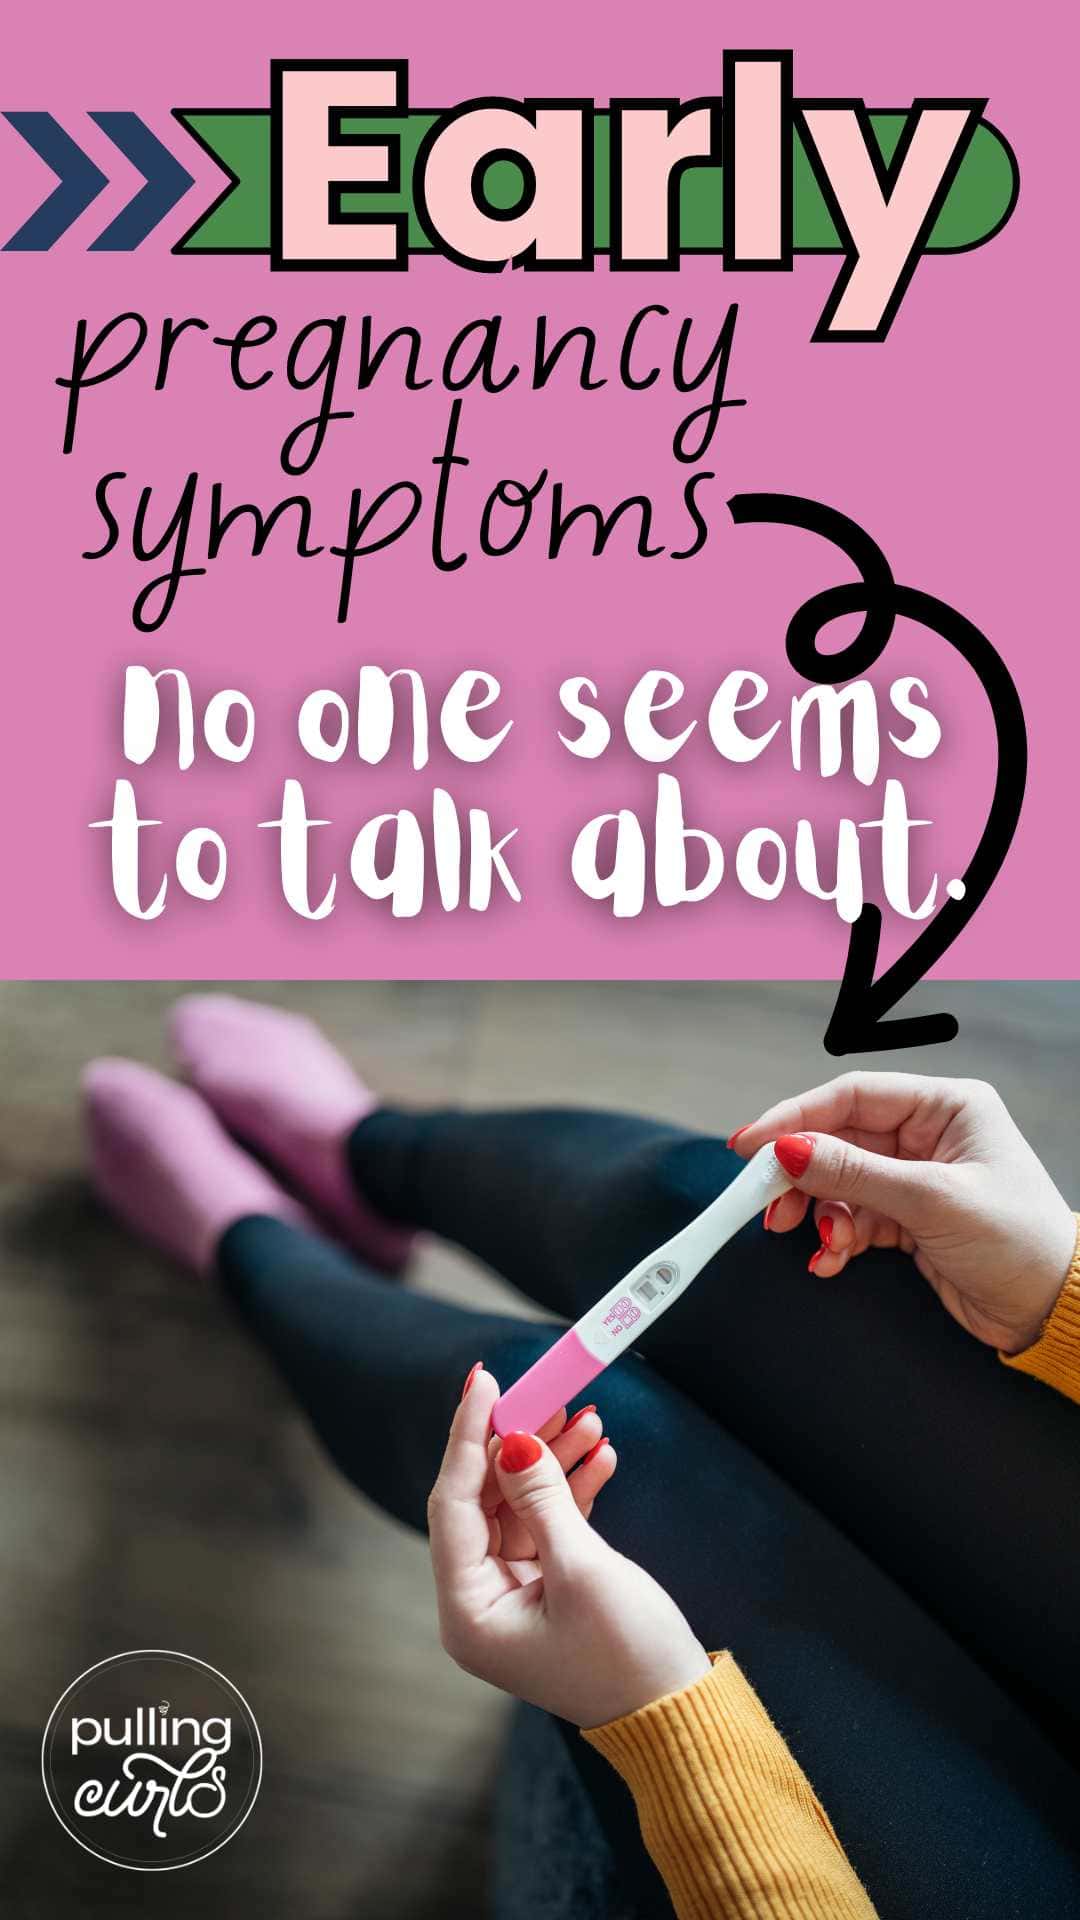 Some early pregnancy symptoms go unnoticed. Look out for subtle signs like fatigue, mood swings, and food aversions. Pay attention to your body's cues and consult your healthcare provider for confirmation. Stay informed to ensure a healthy pregnancy journey. Early pregnancy symptoms, pregnancy signs, prenatal care, healthcare guidance, maternal health, pregnancy awareness. via @pullingcurls